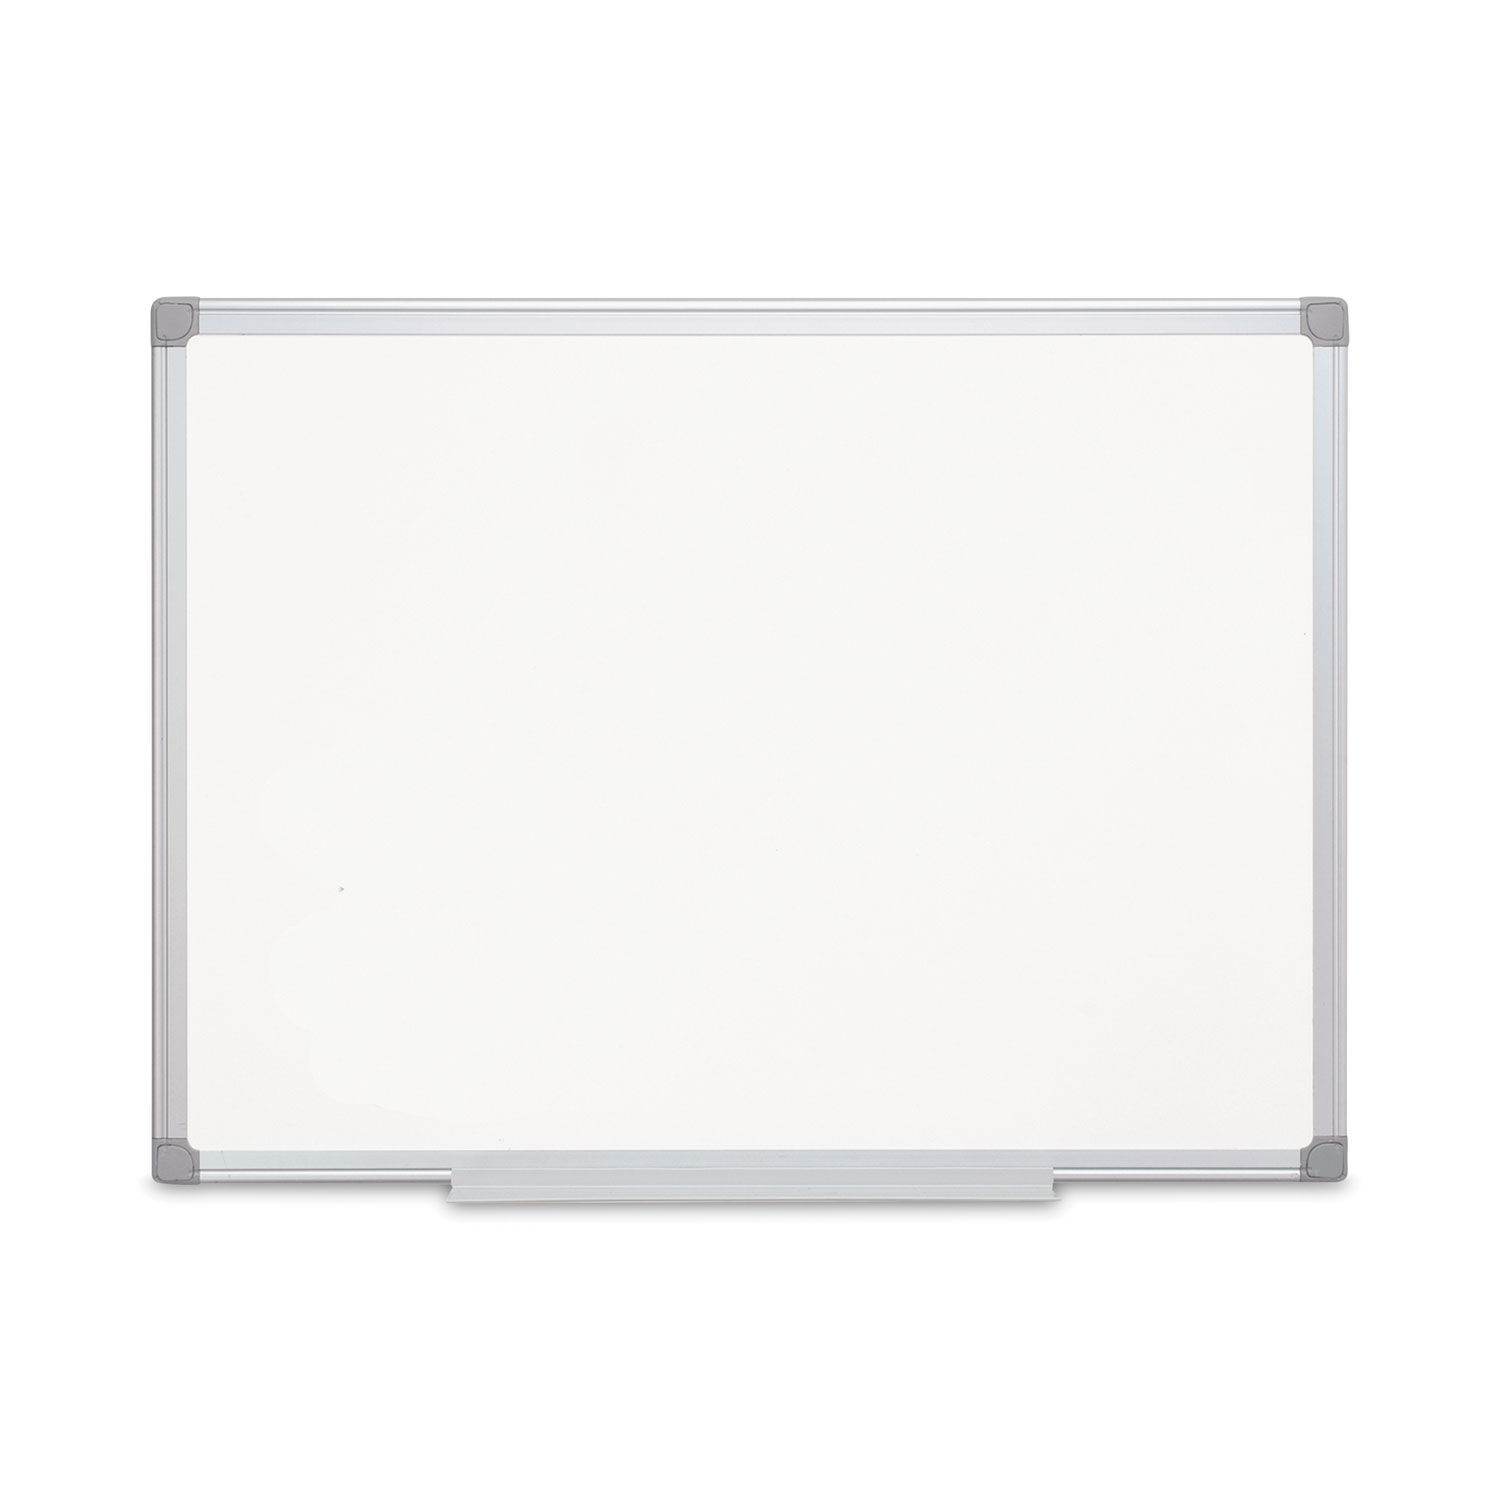 Earth Silver Easy-Clean Dry Erase Board 48 x 36, White Surface, Silver Aluminum Frame